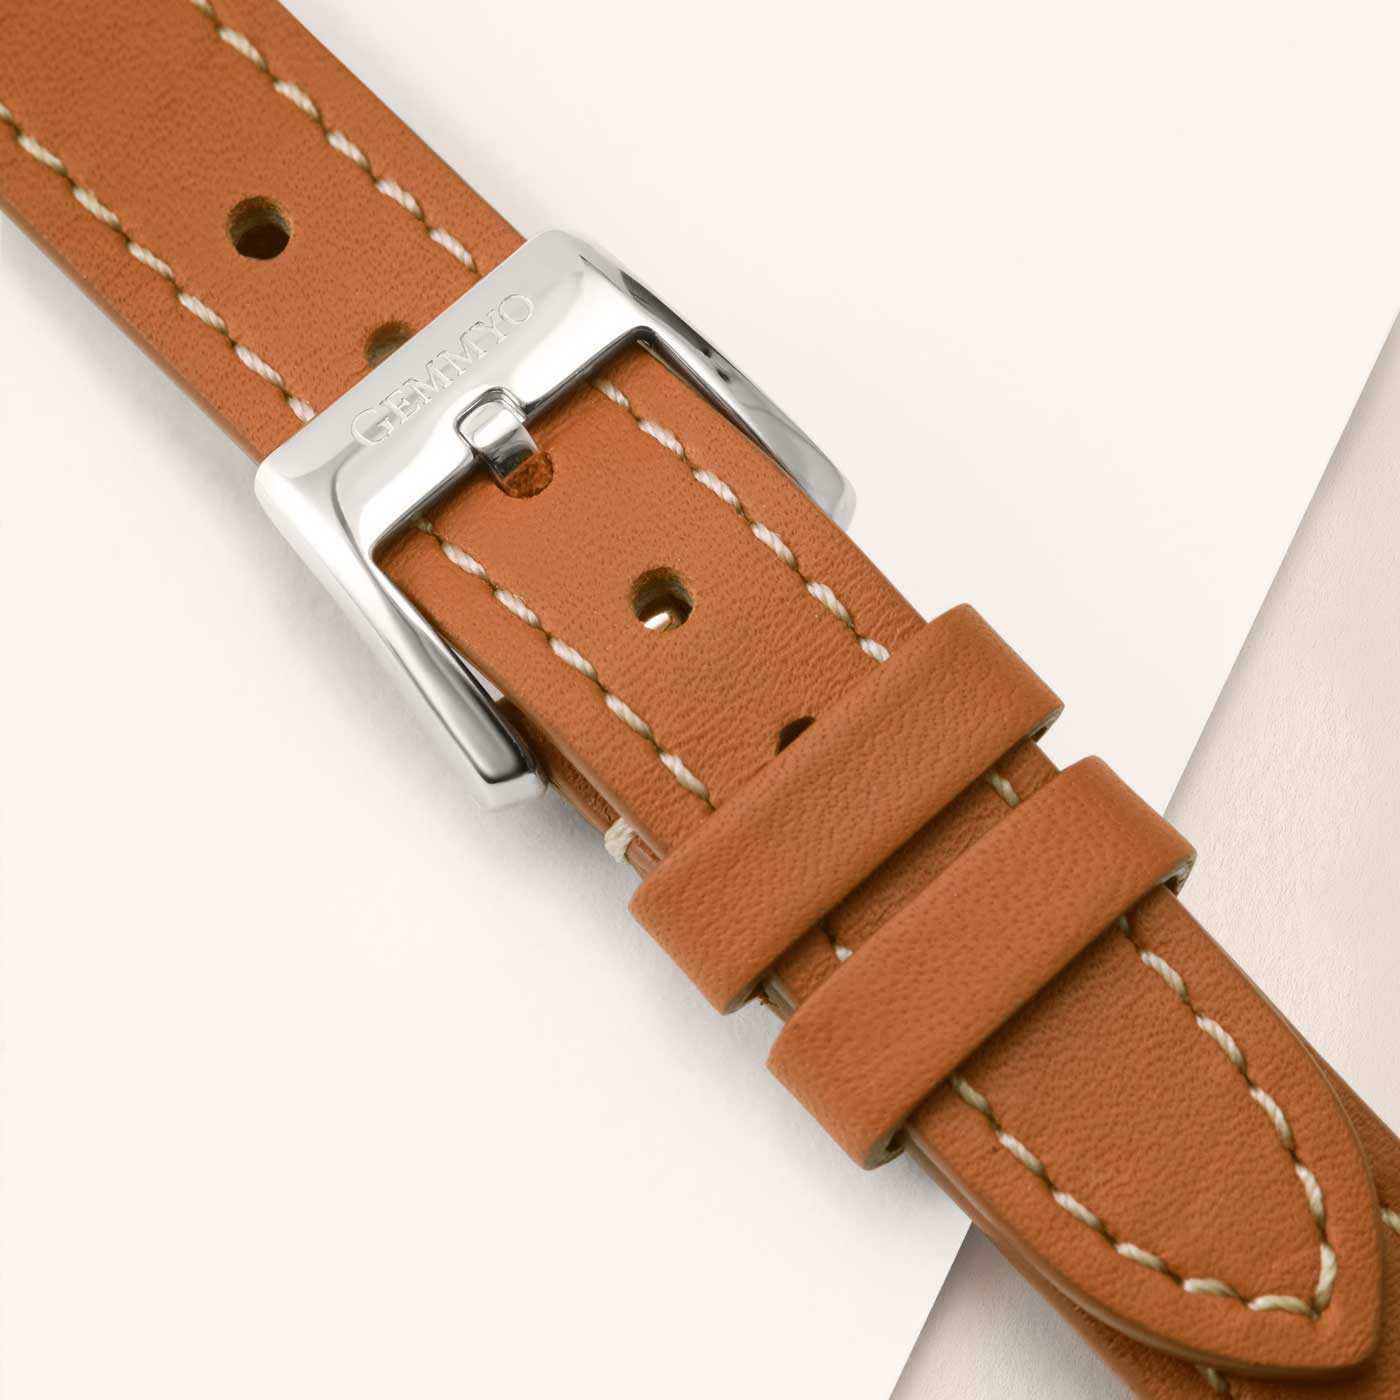 Prima double Watch strap zoom